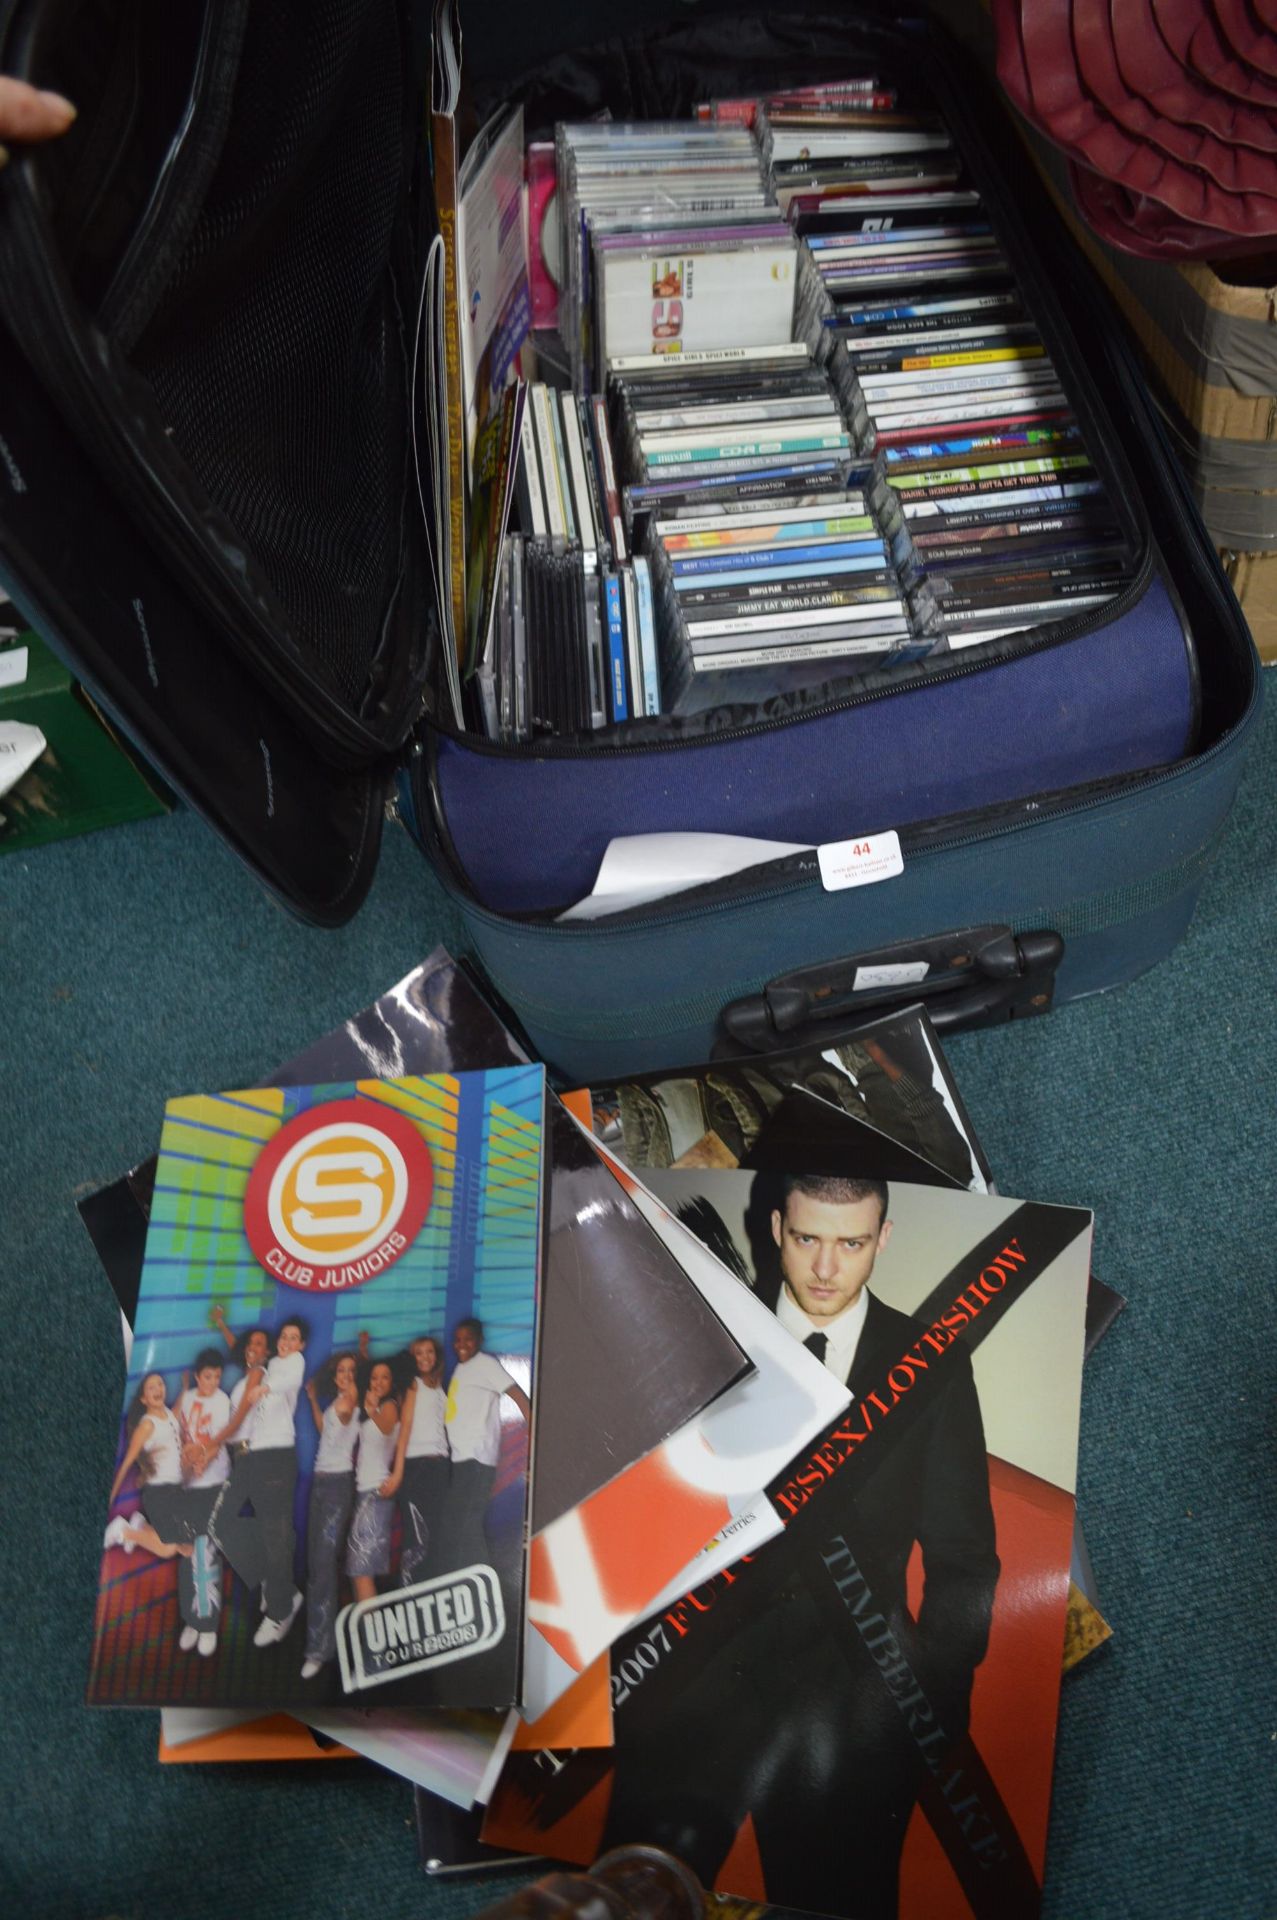 Suitcase Containing CDs and Concert Programmes